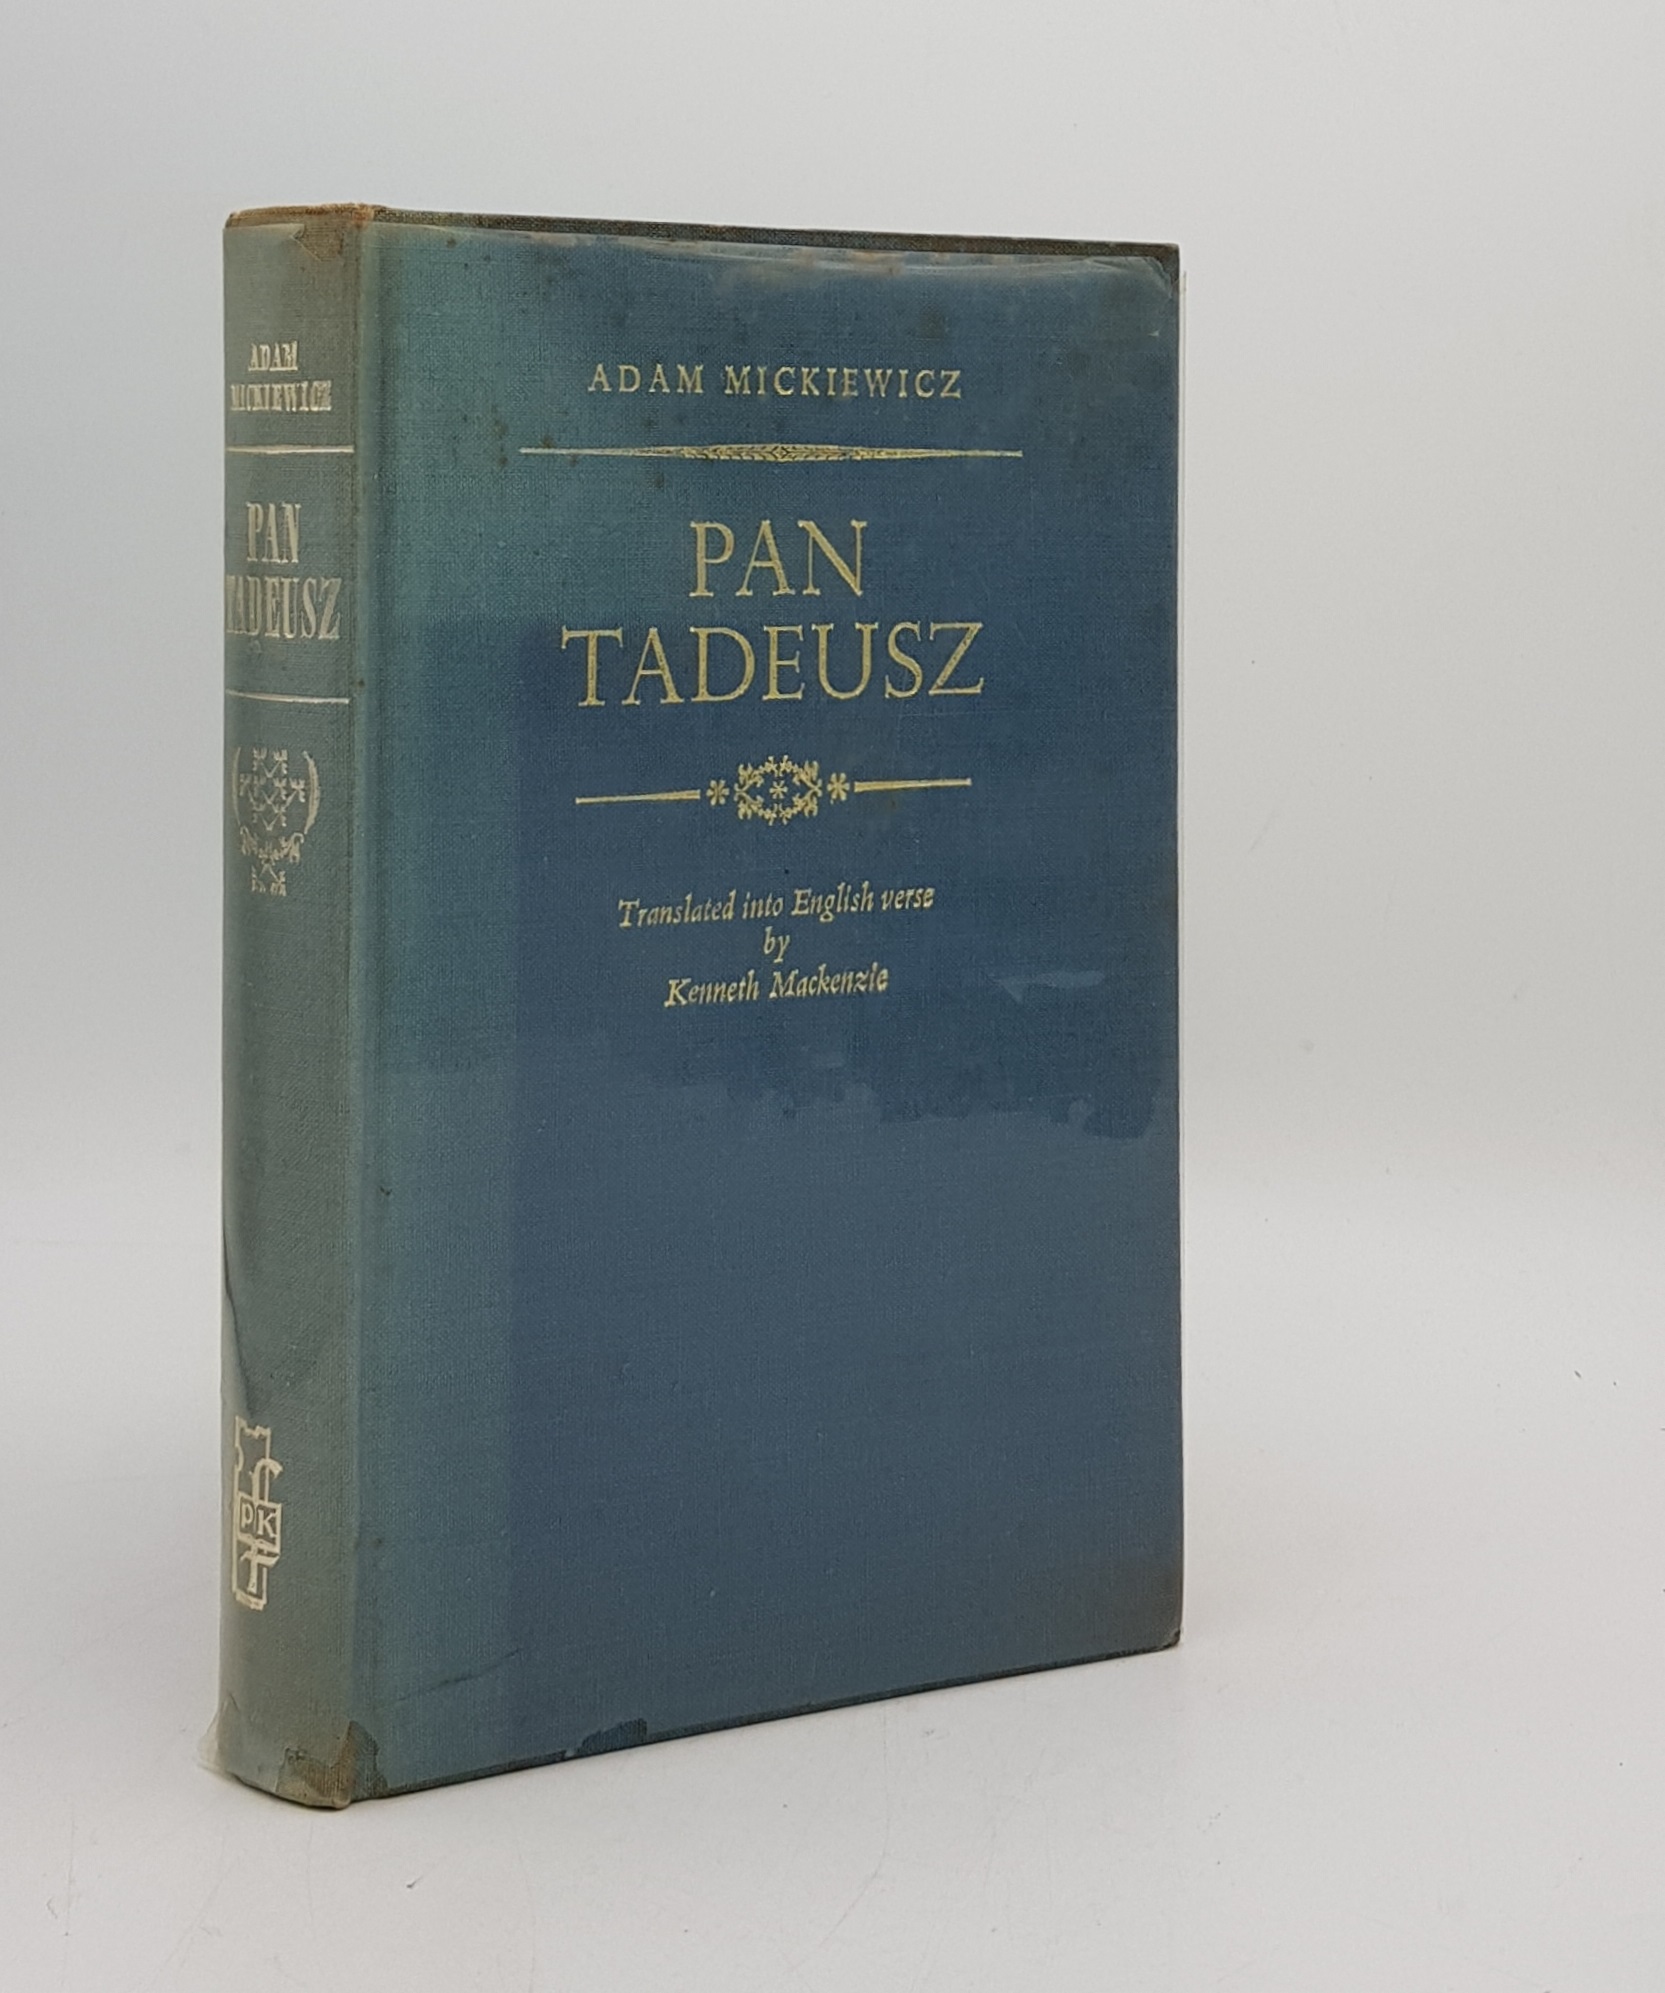 PAN TADEUSZ Or the Last Foray in Lithuania A Story of Life Among Polish Gentlefolk in the Years 1811 and 1812 - MICKIEWICZ Adam, MacKENZIE Kenneth [Translator]